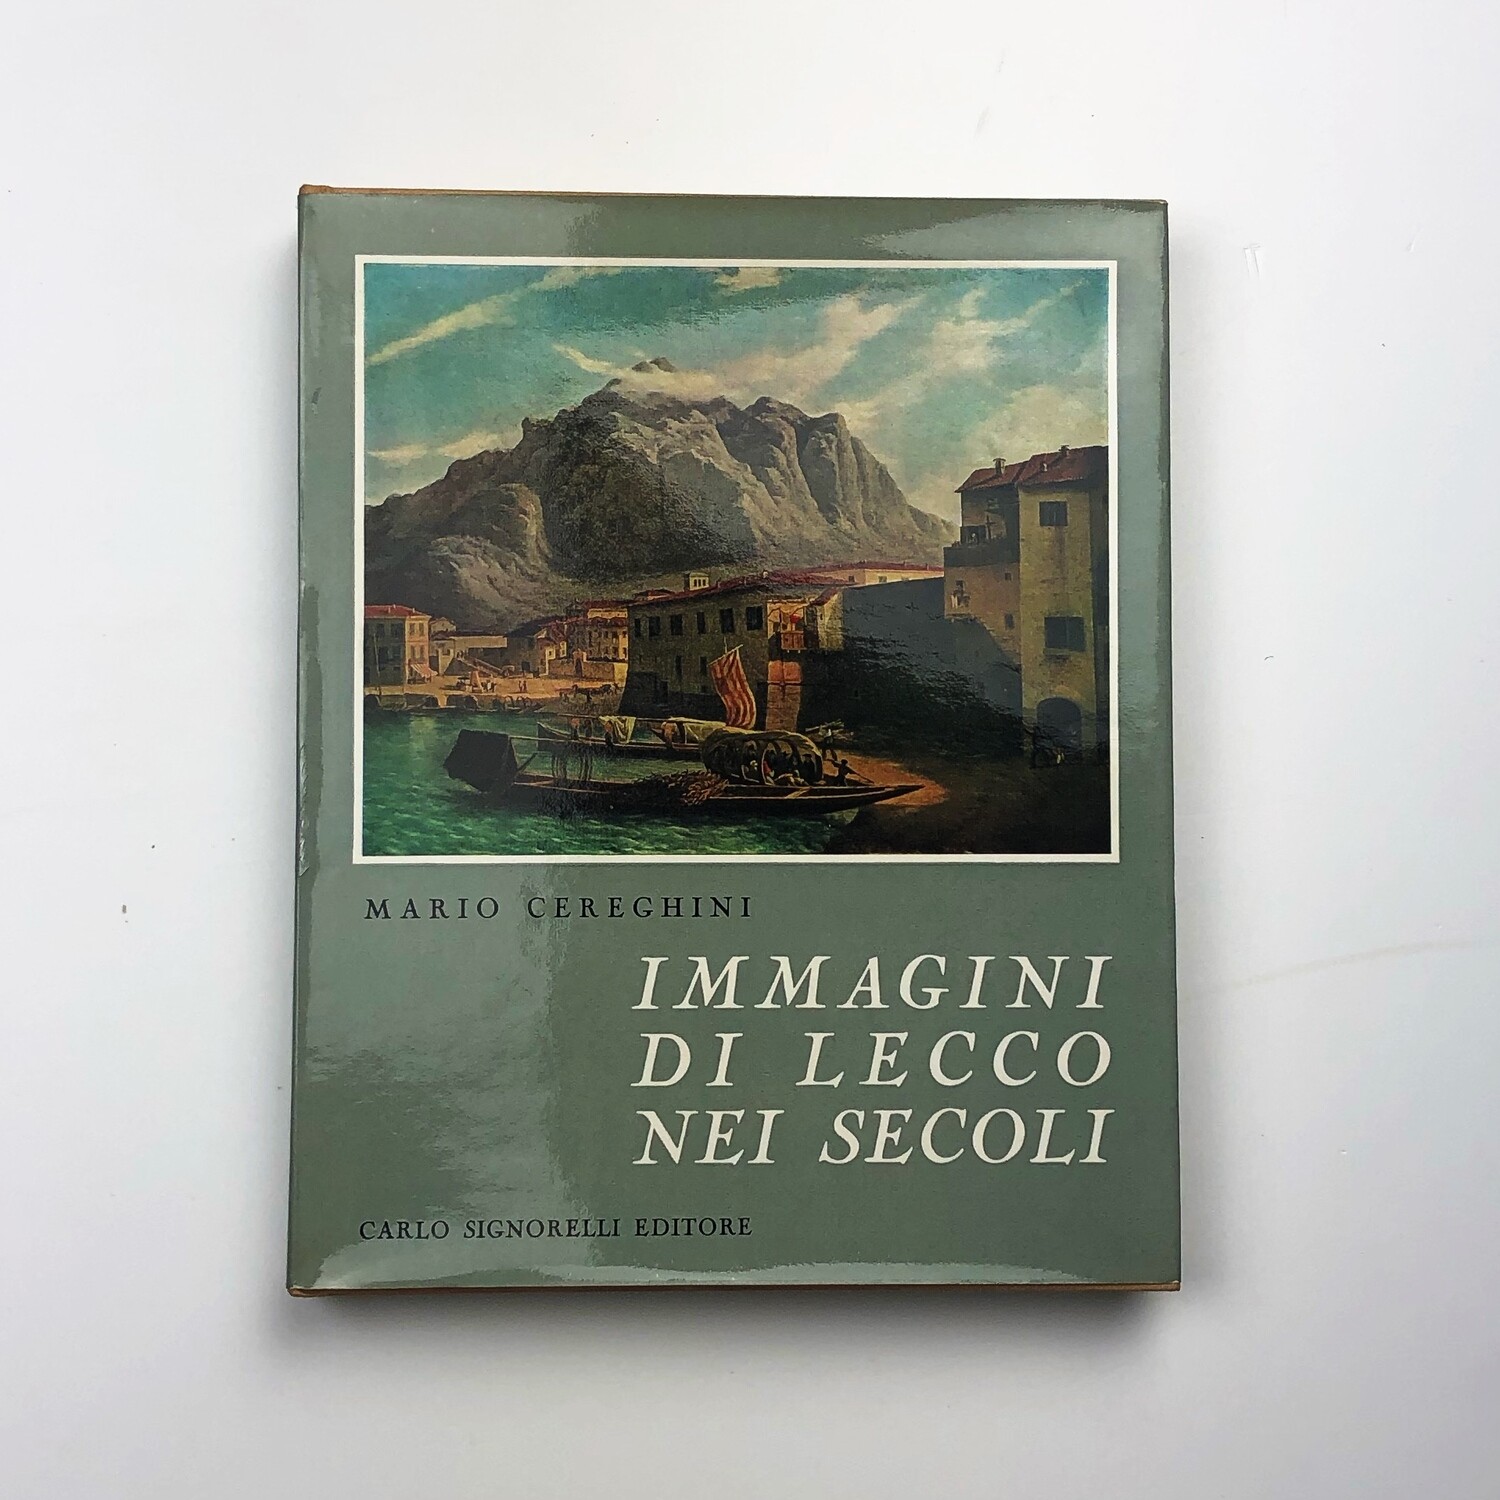 Images of Lecco in the Centuries of Mario Cereghini